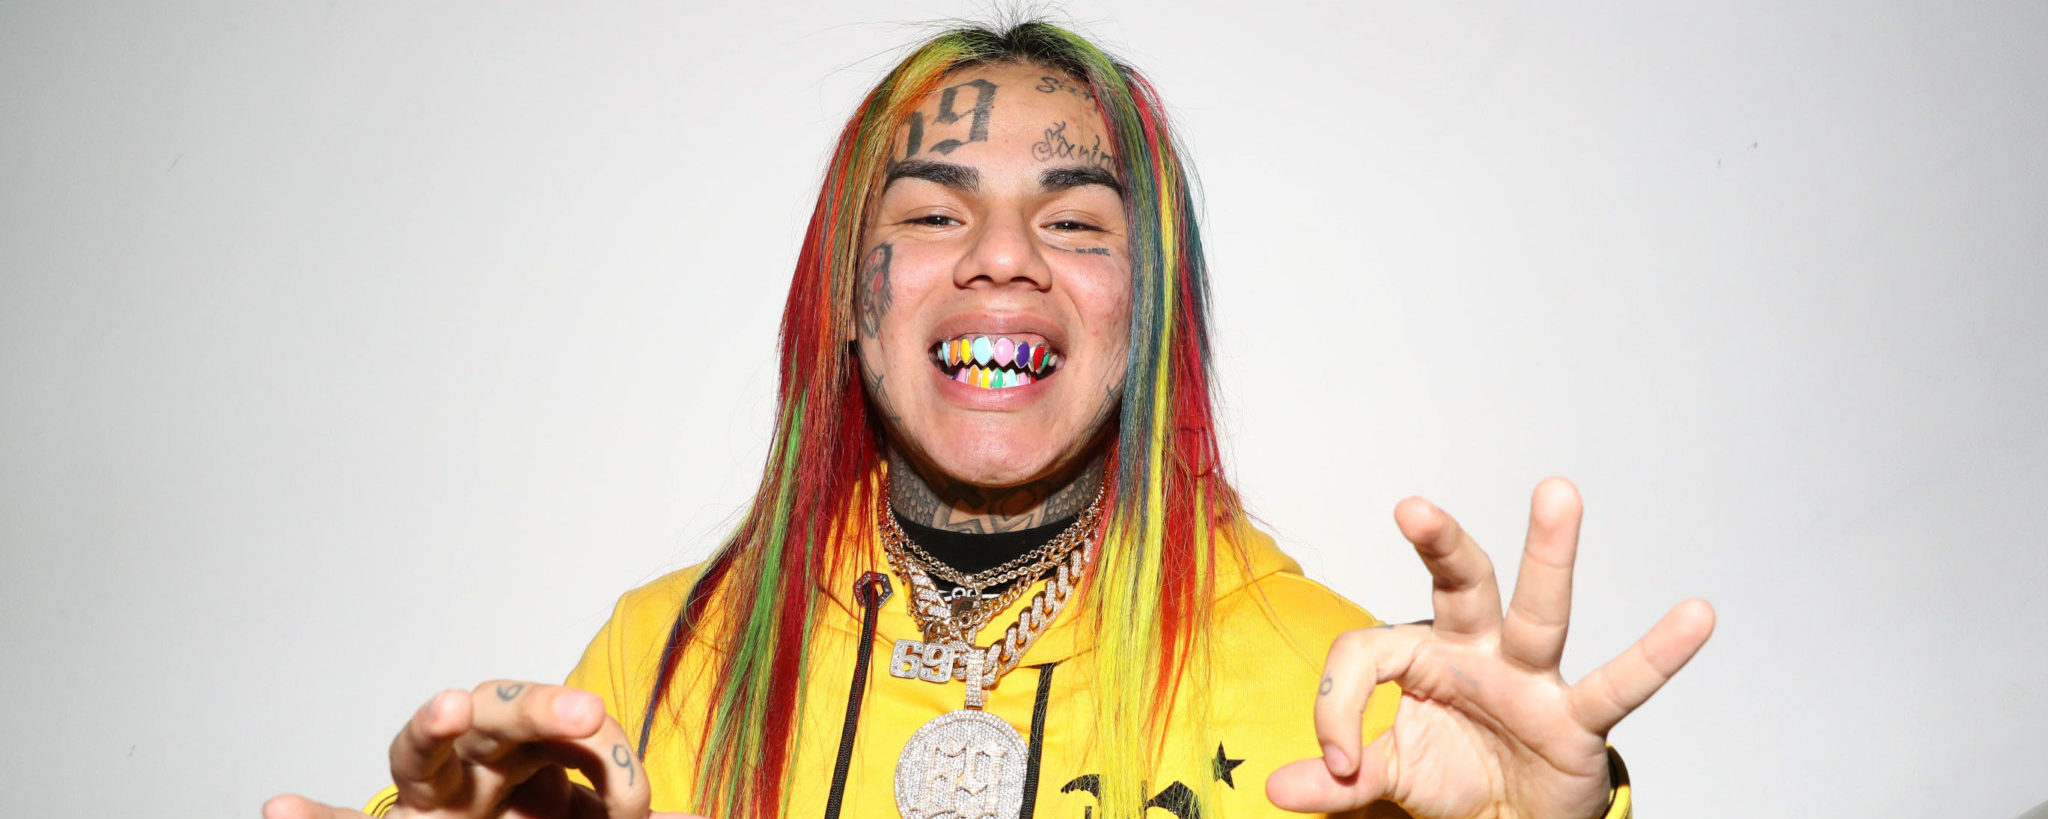 Tekashi 6ix9ine's Girlfriend Shows Her Support With Tattoo Of His